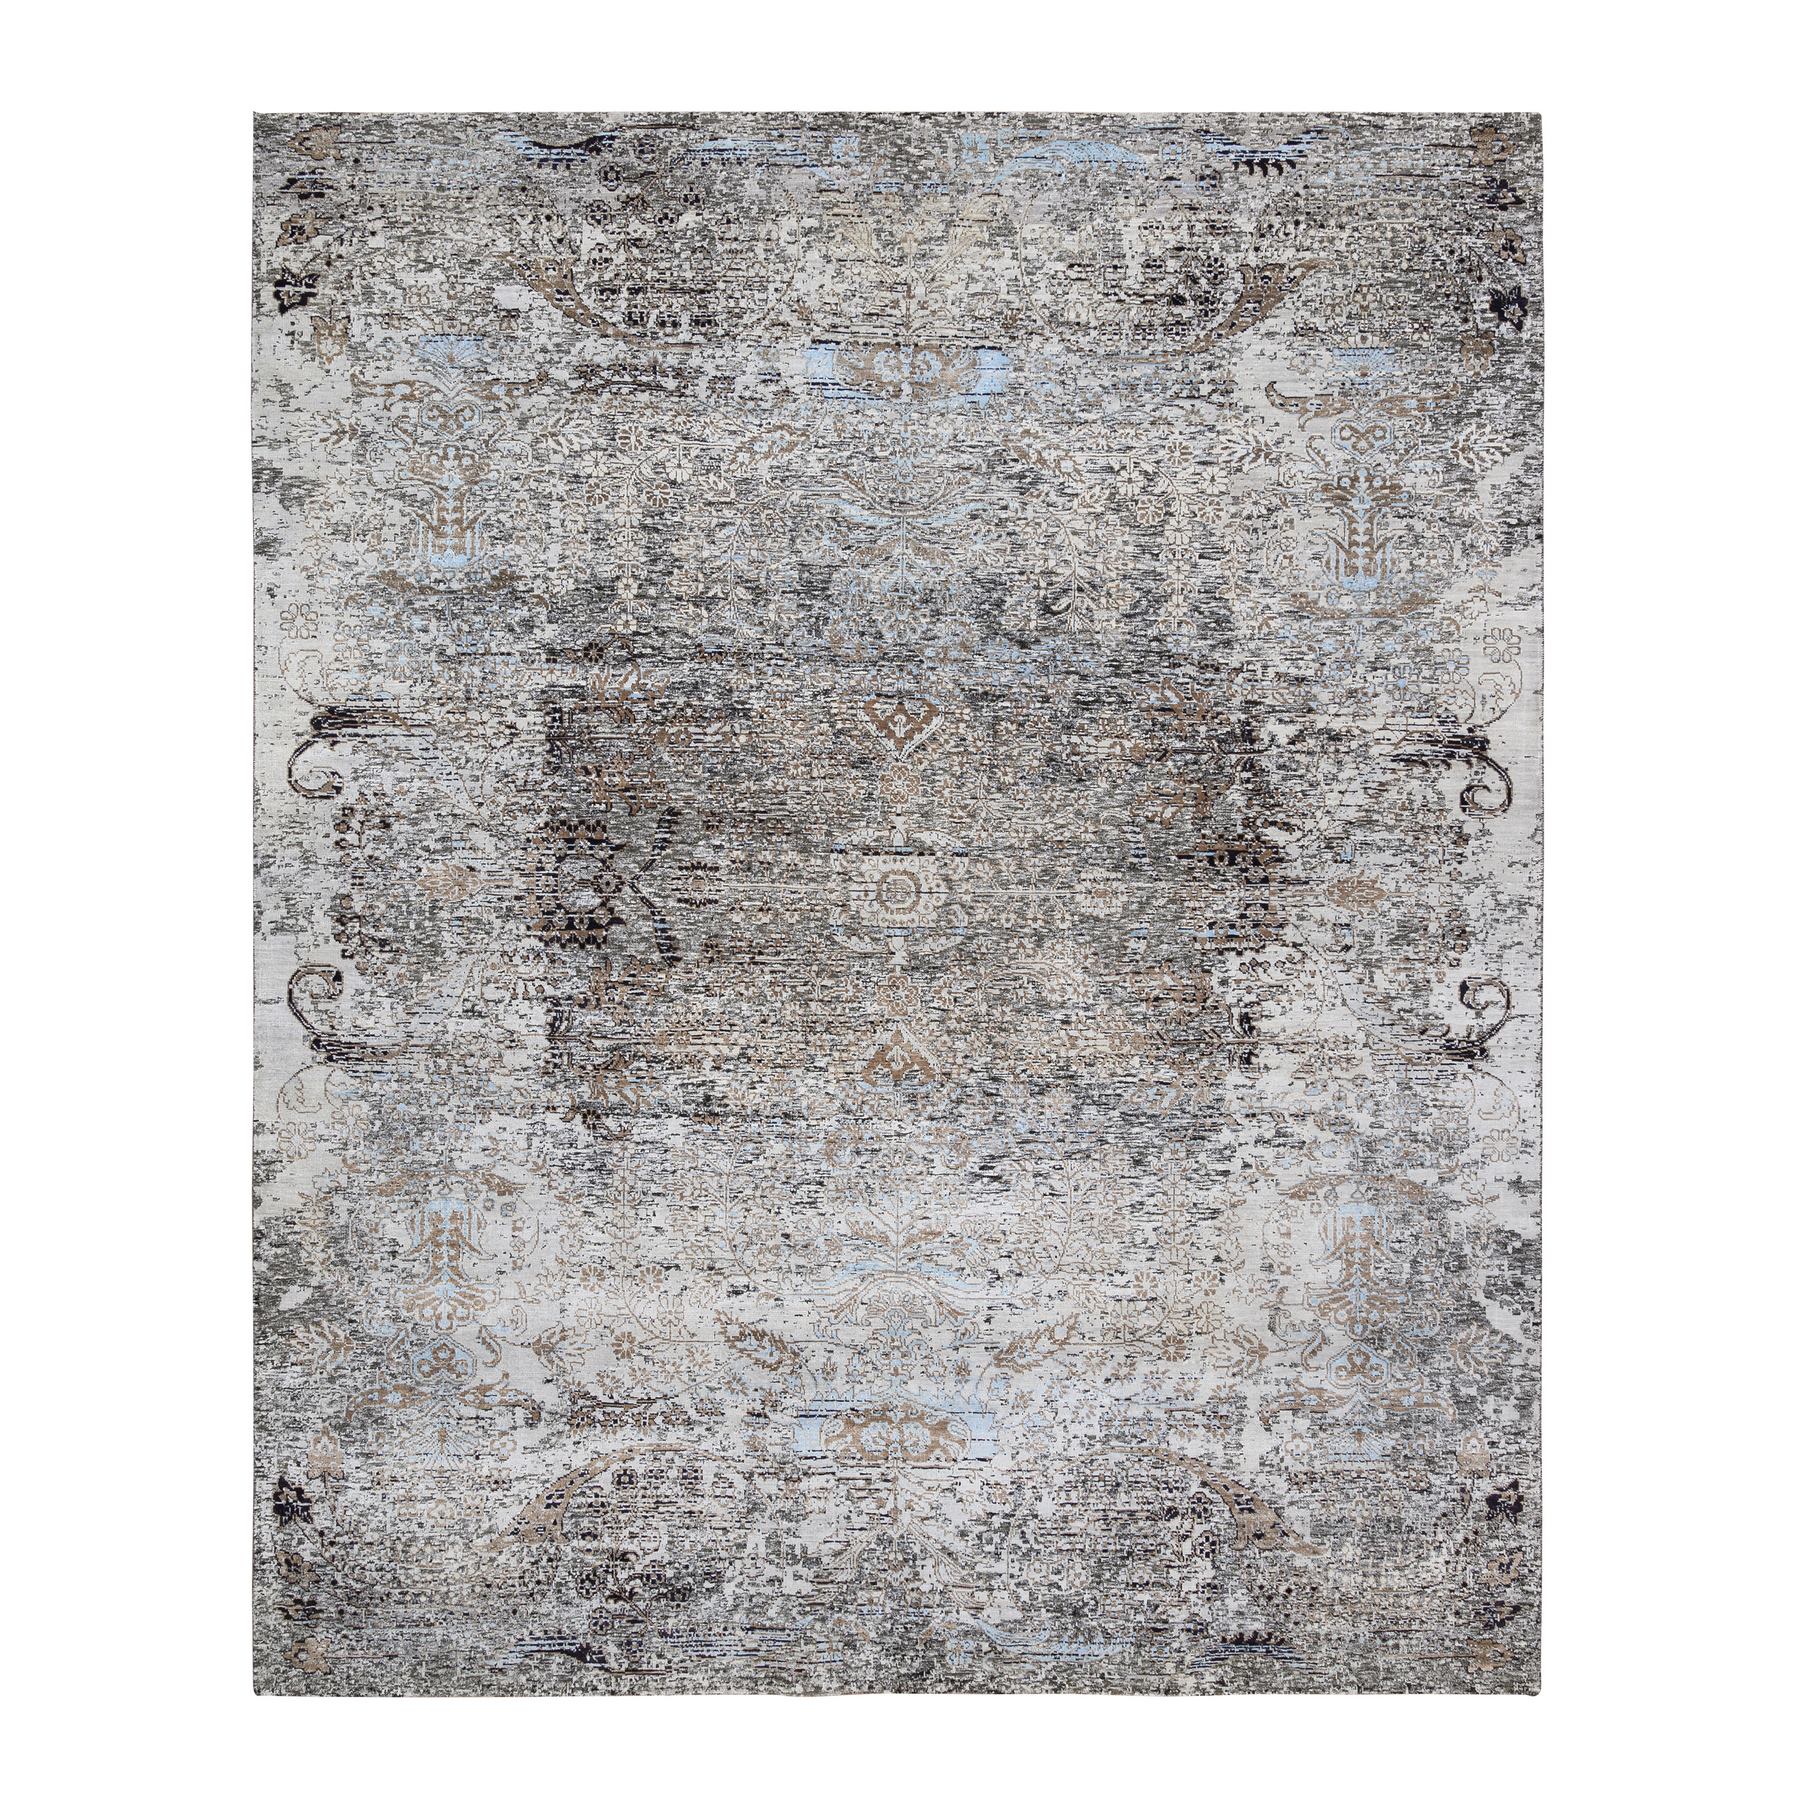 8'2"x9'10" Silk with Textured Wool Transitional Persian Influence Erased Medallion Design Hand Woven Oriental Rug 